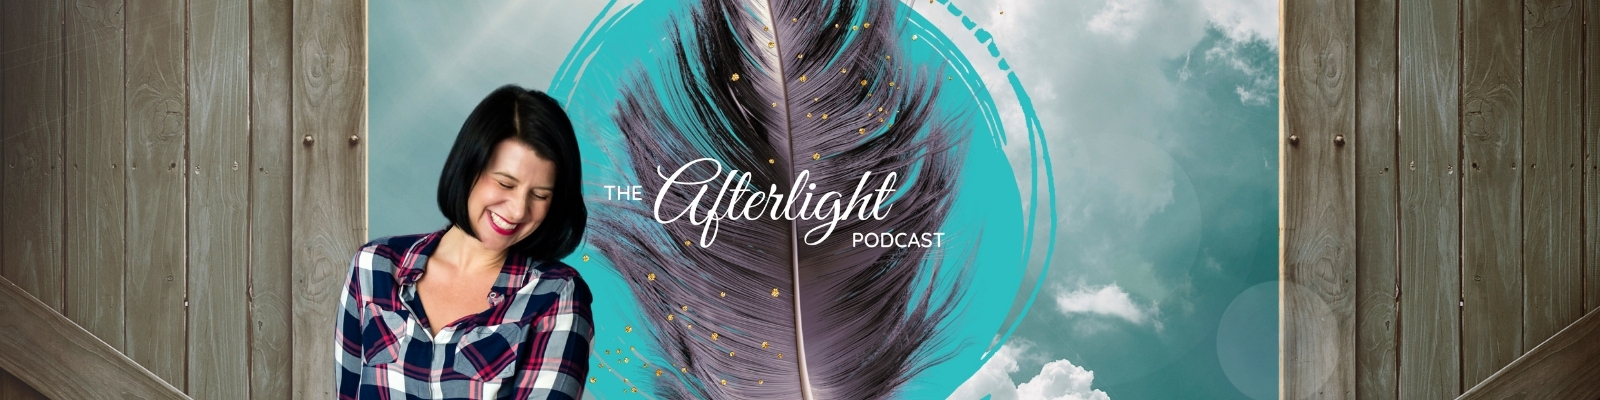 The Afterlight Podcast